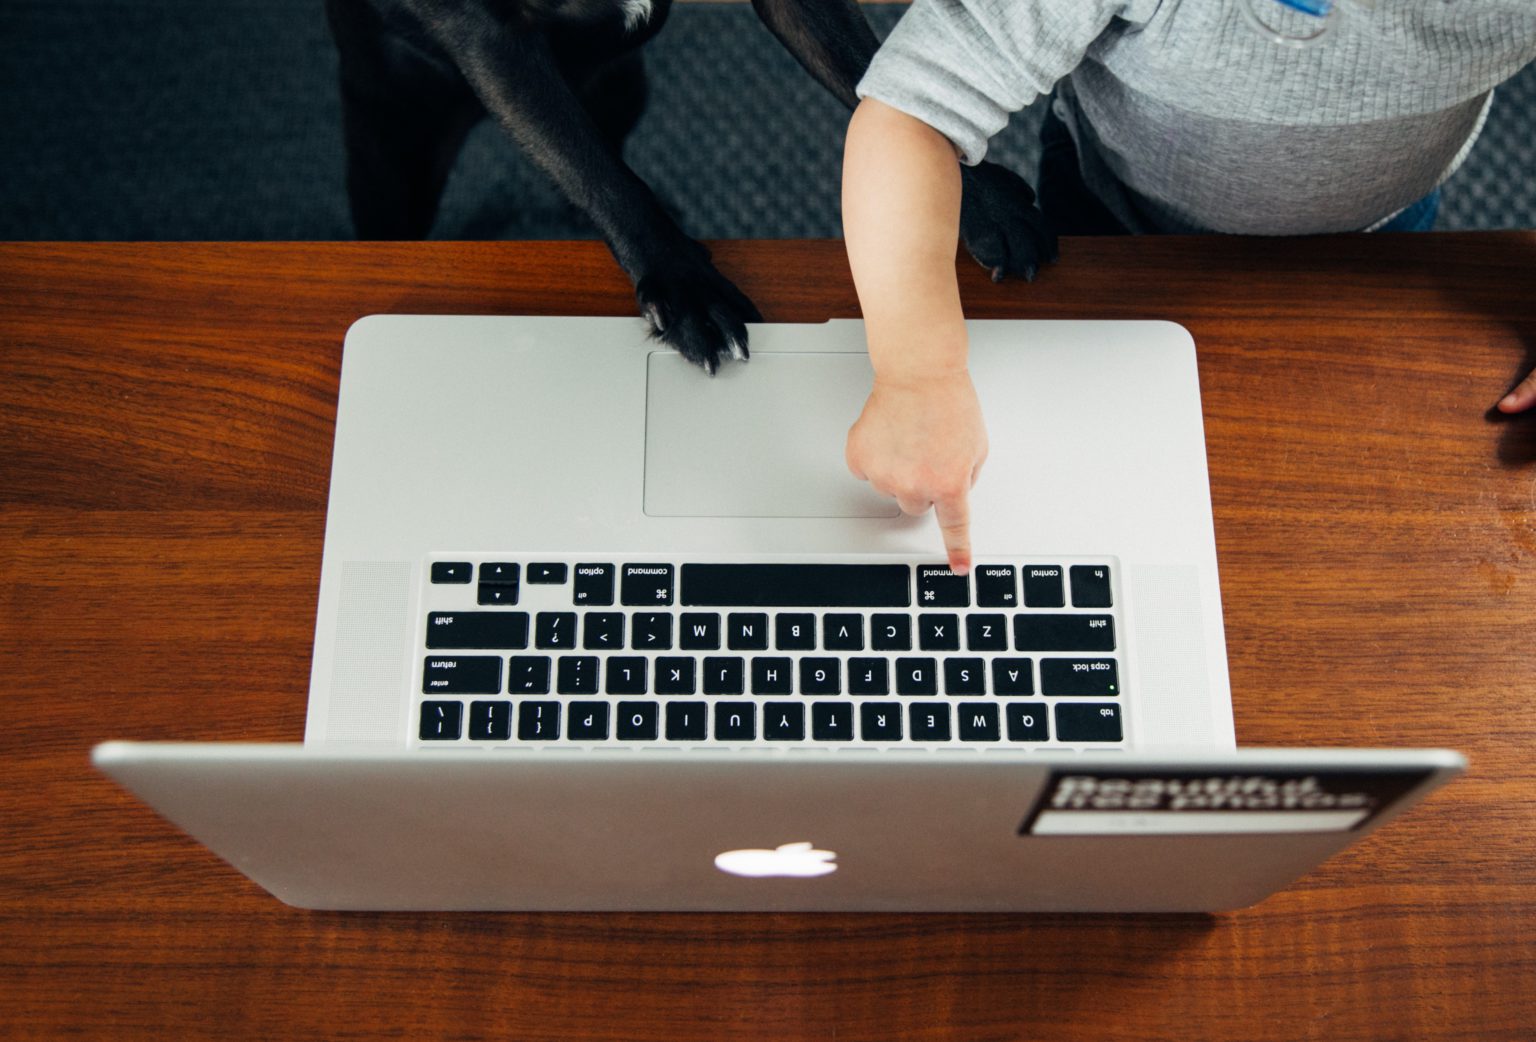 Photo of a child's hand and a dog's paw pressing keys on a laptop